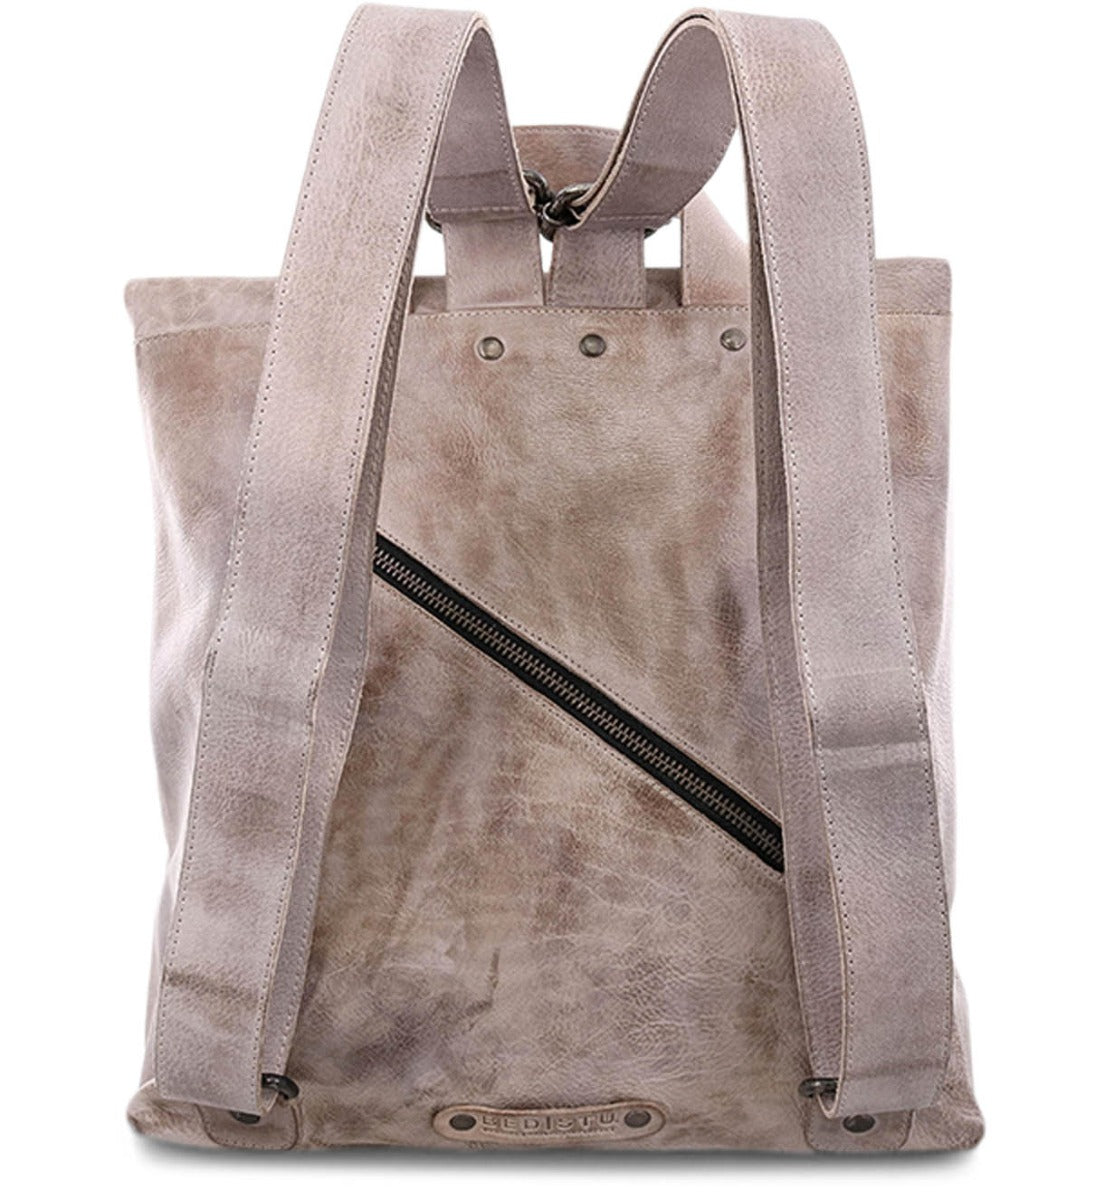 A grey leather Howie backpack with zippers on the side. Brand: Bed Stu.